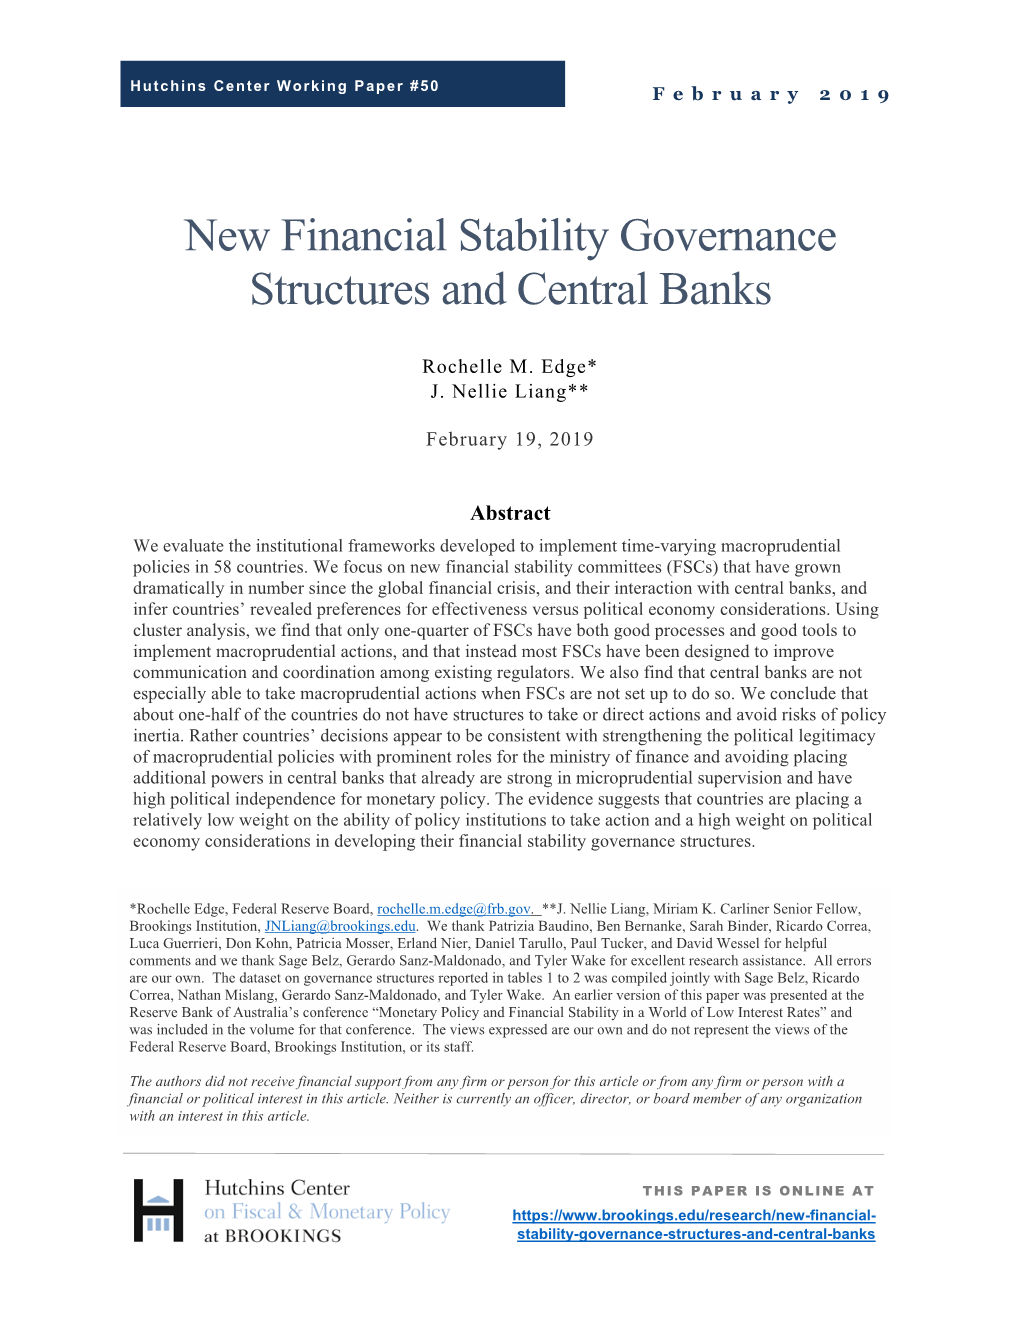 New Financial Stability Governance Structures and Central Banks